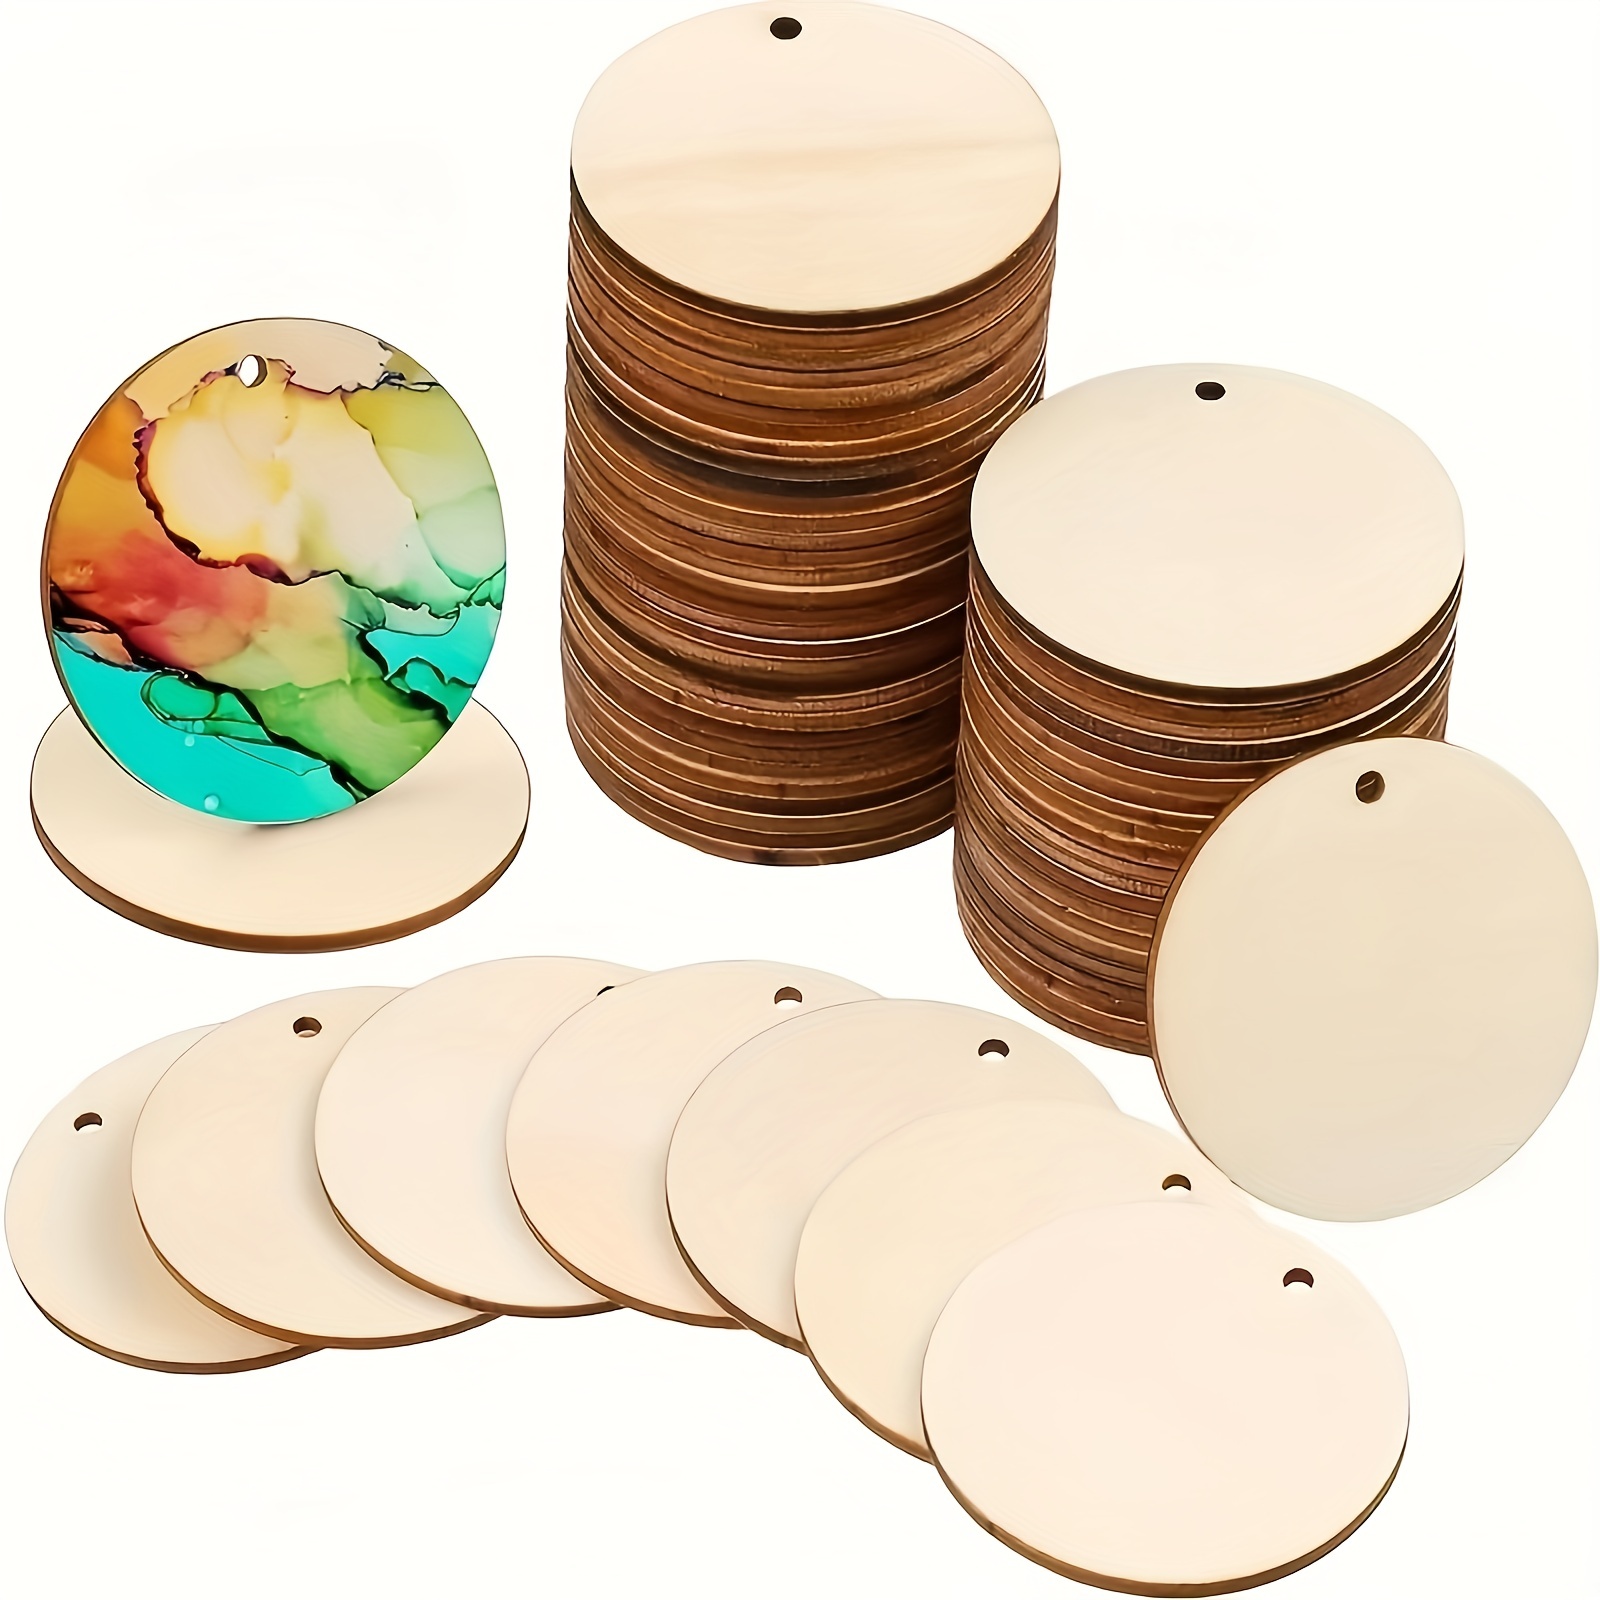 40 Pcs 8 inch Wooden Circles for Crafts, Unfinished Wooden Round Natural Wooden Discs Blank Wood Circle for DIY Crafts, Door Hanger, Painting, Coaster